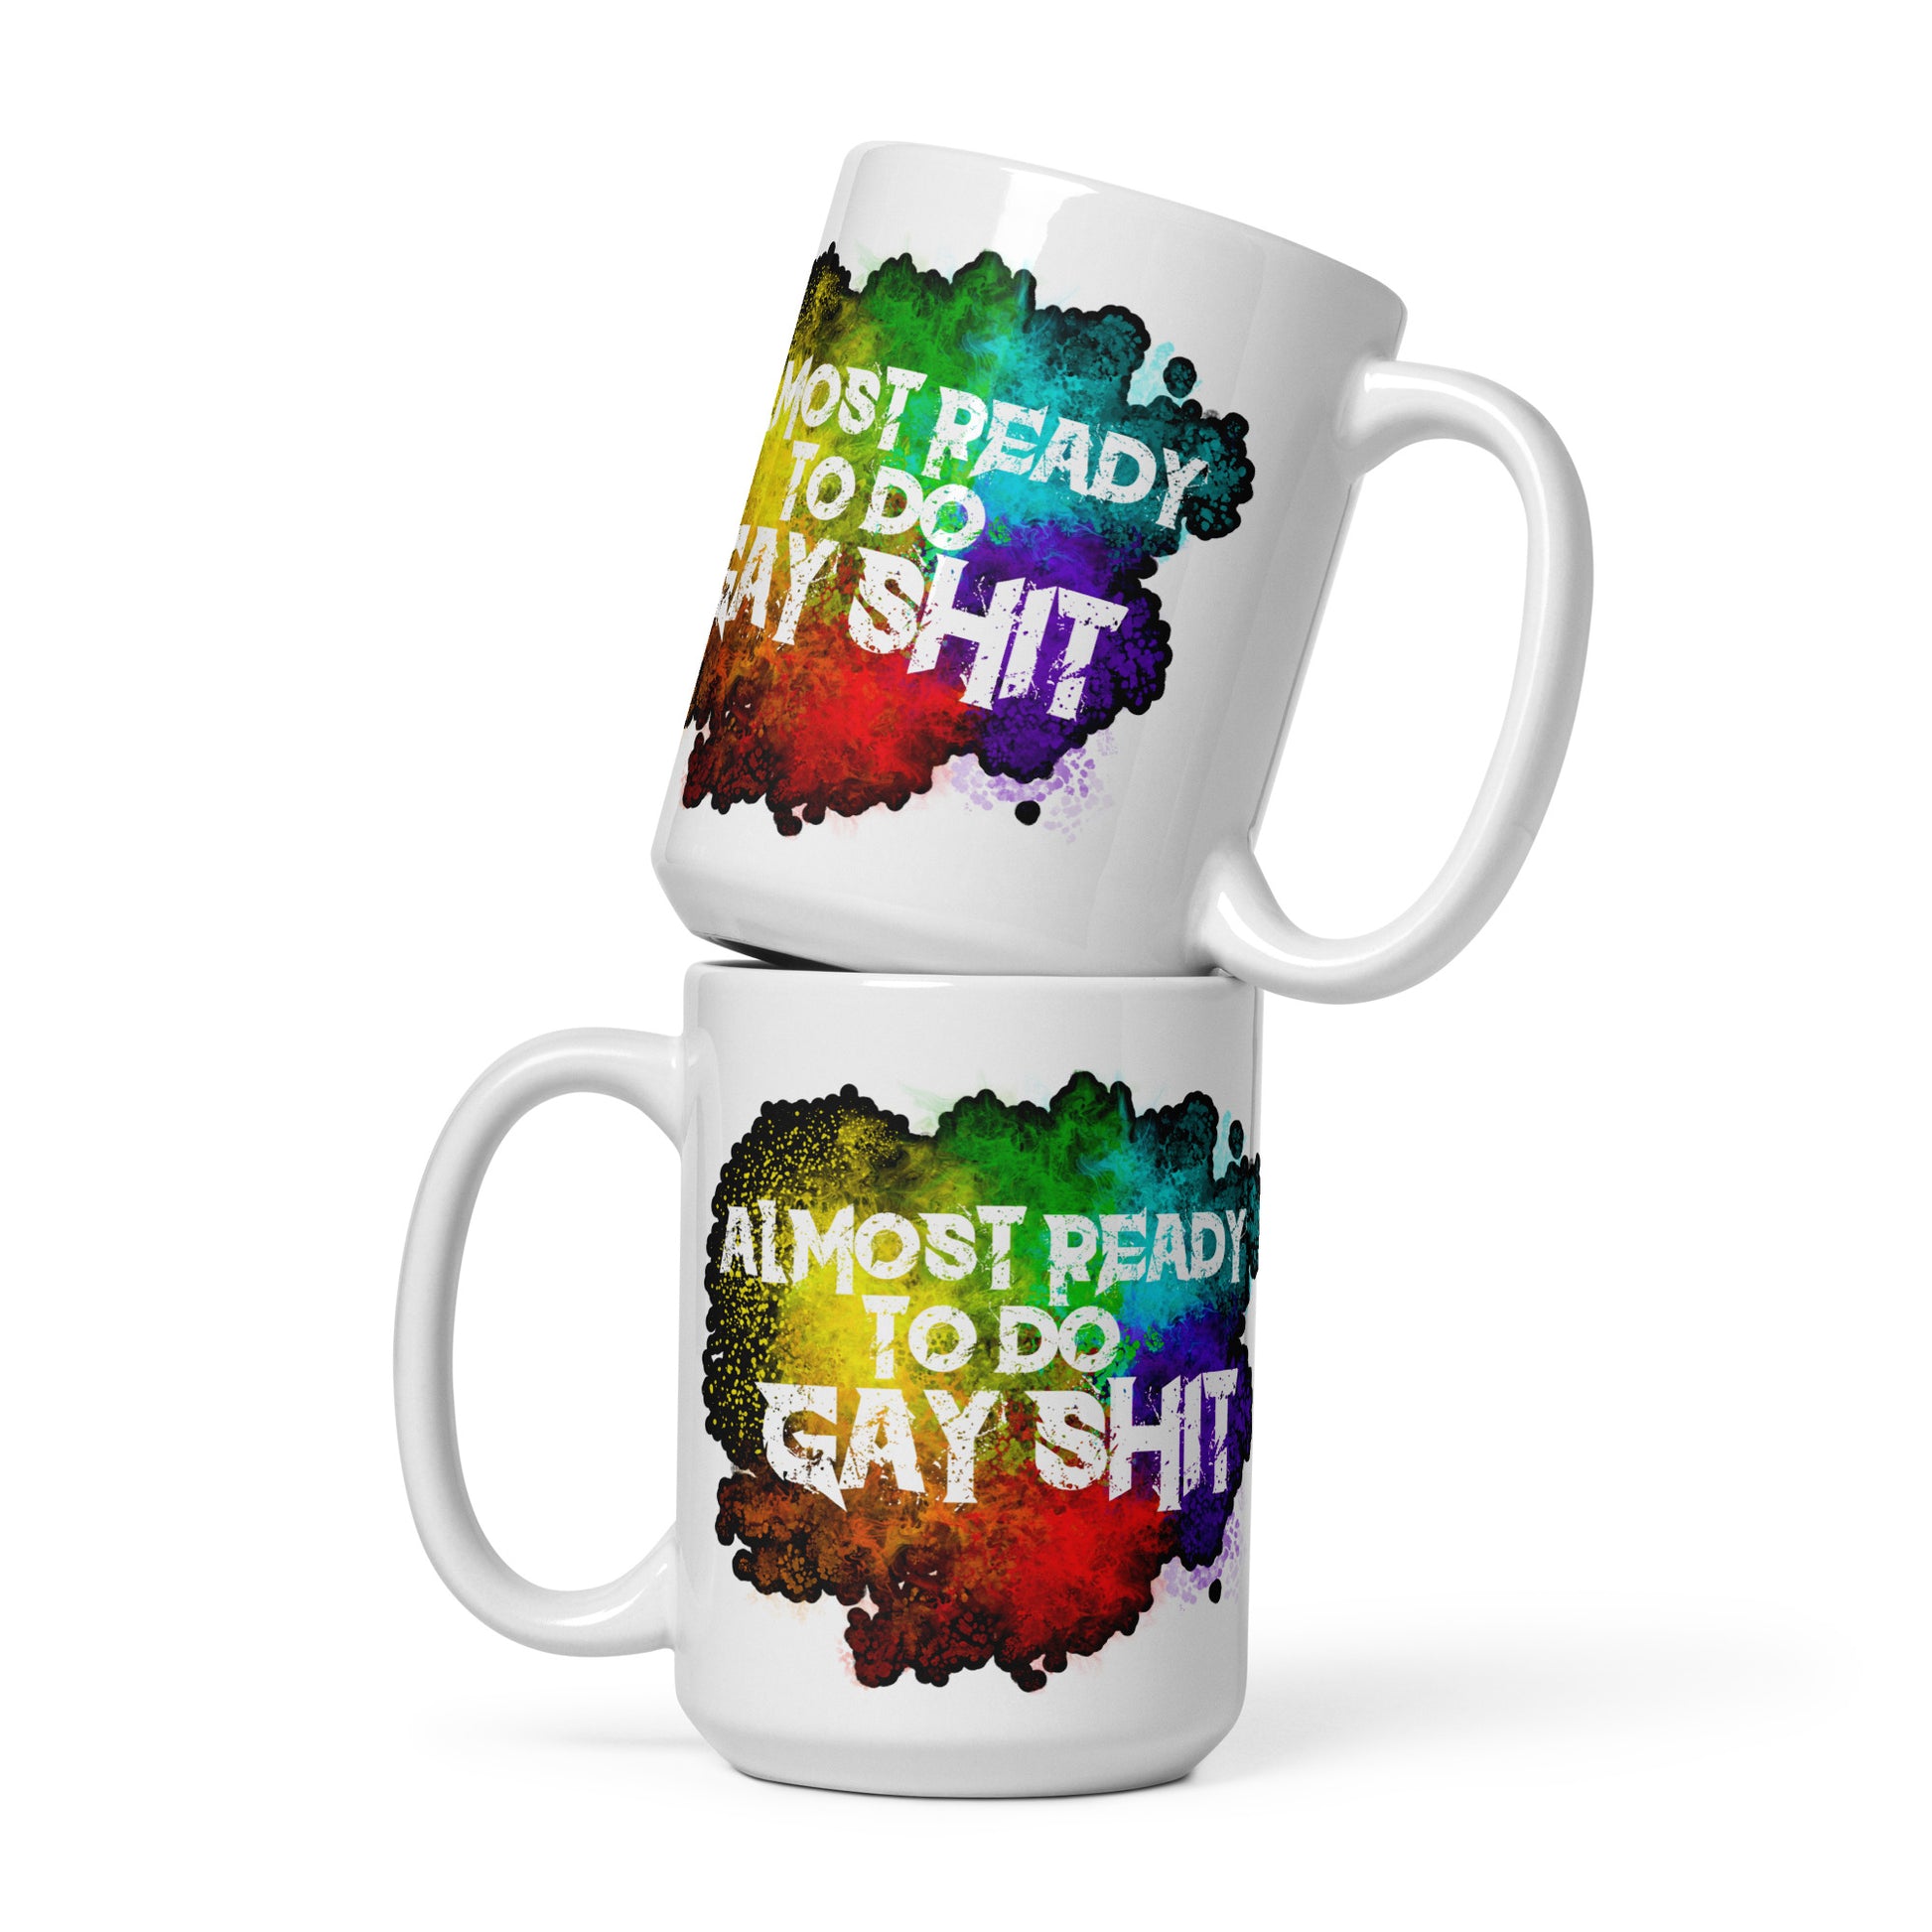 15oz white glossy mug by Moody Booty Apparel featuring the text 'Almost Ready To Do Gay Shit.' LGBTQ pride-themed coffee mug for gay people and the LGBTQ community. Ideal for expressing pride and celebrating diversity.